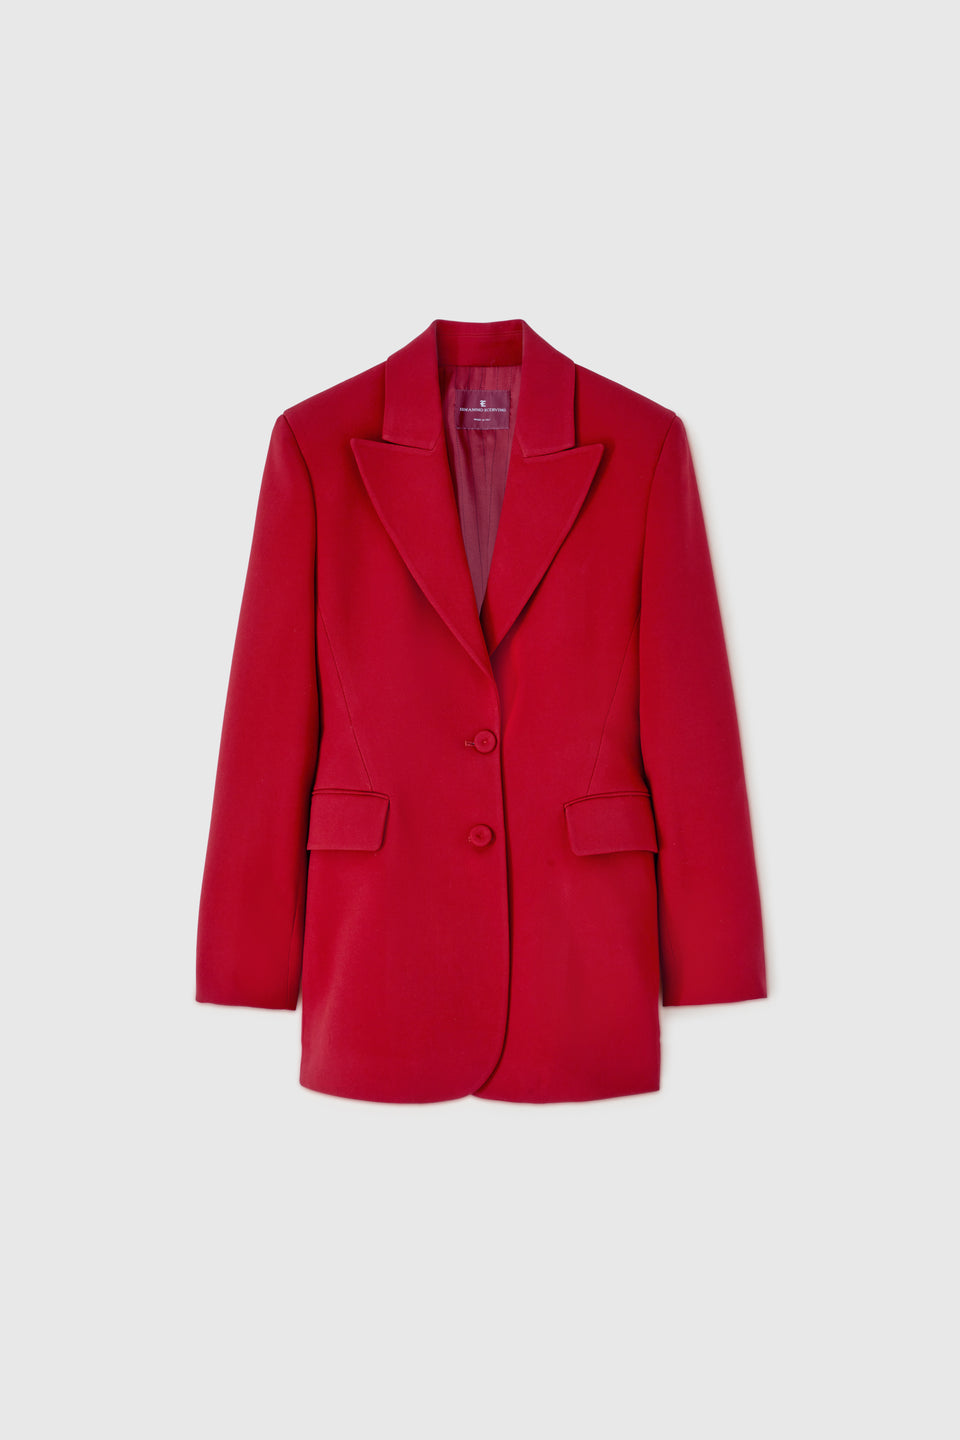 Single-breasted red wool blazer